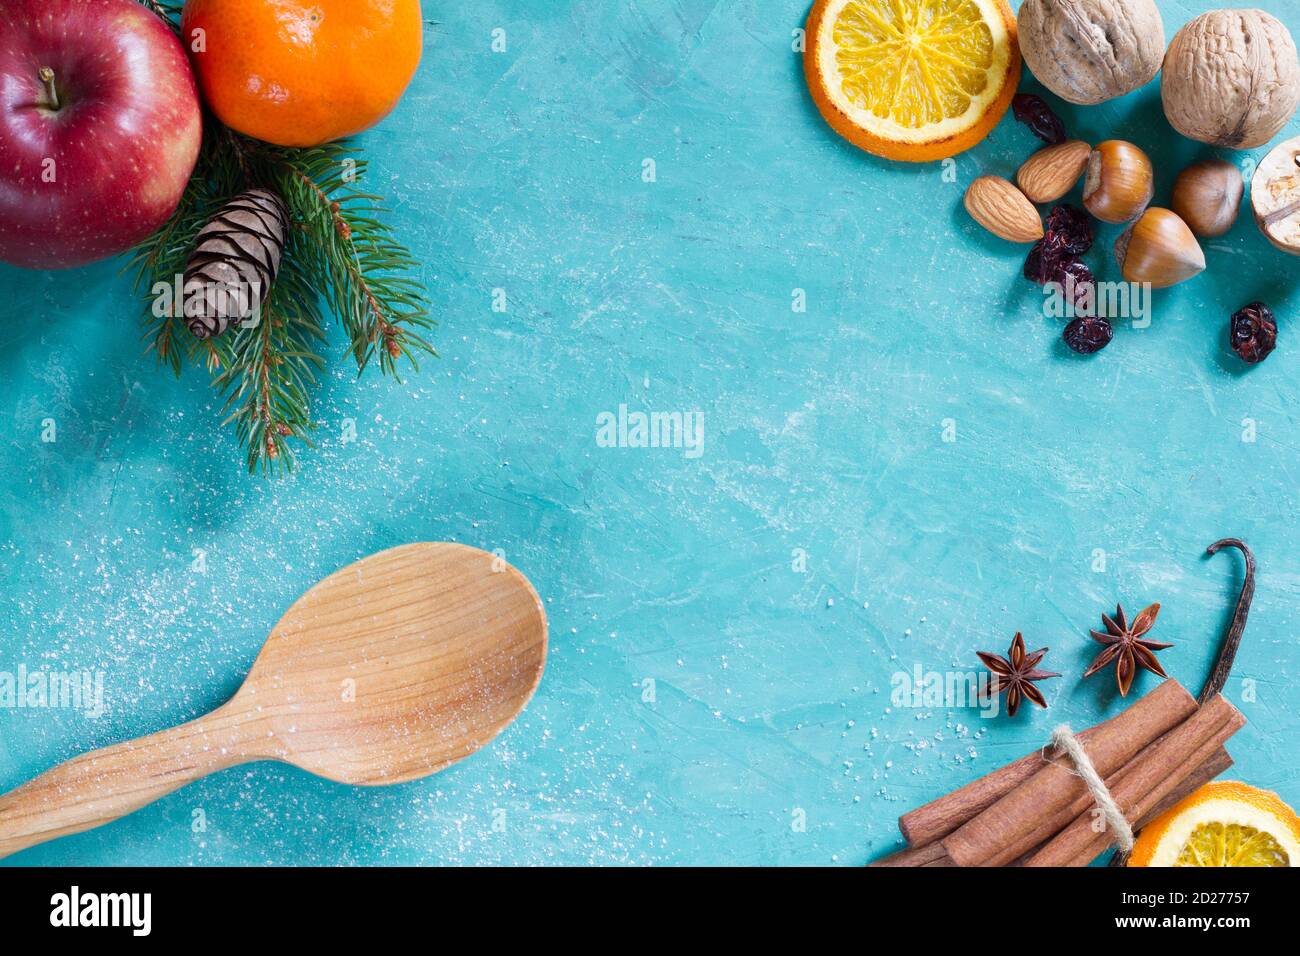 Christmas food background with fruits, spices and nuts Stock Photo